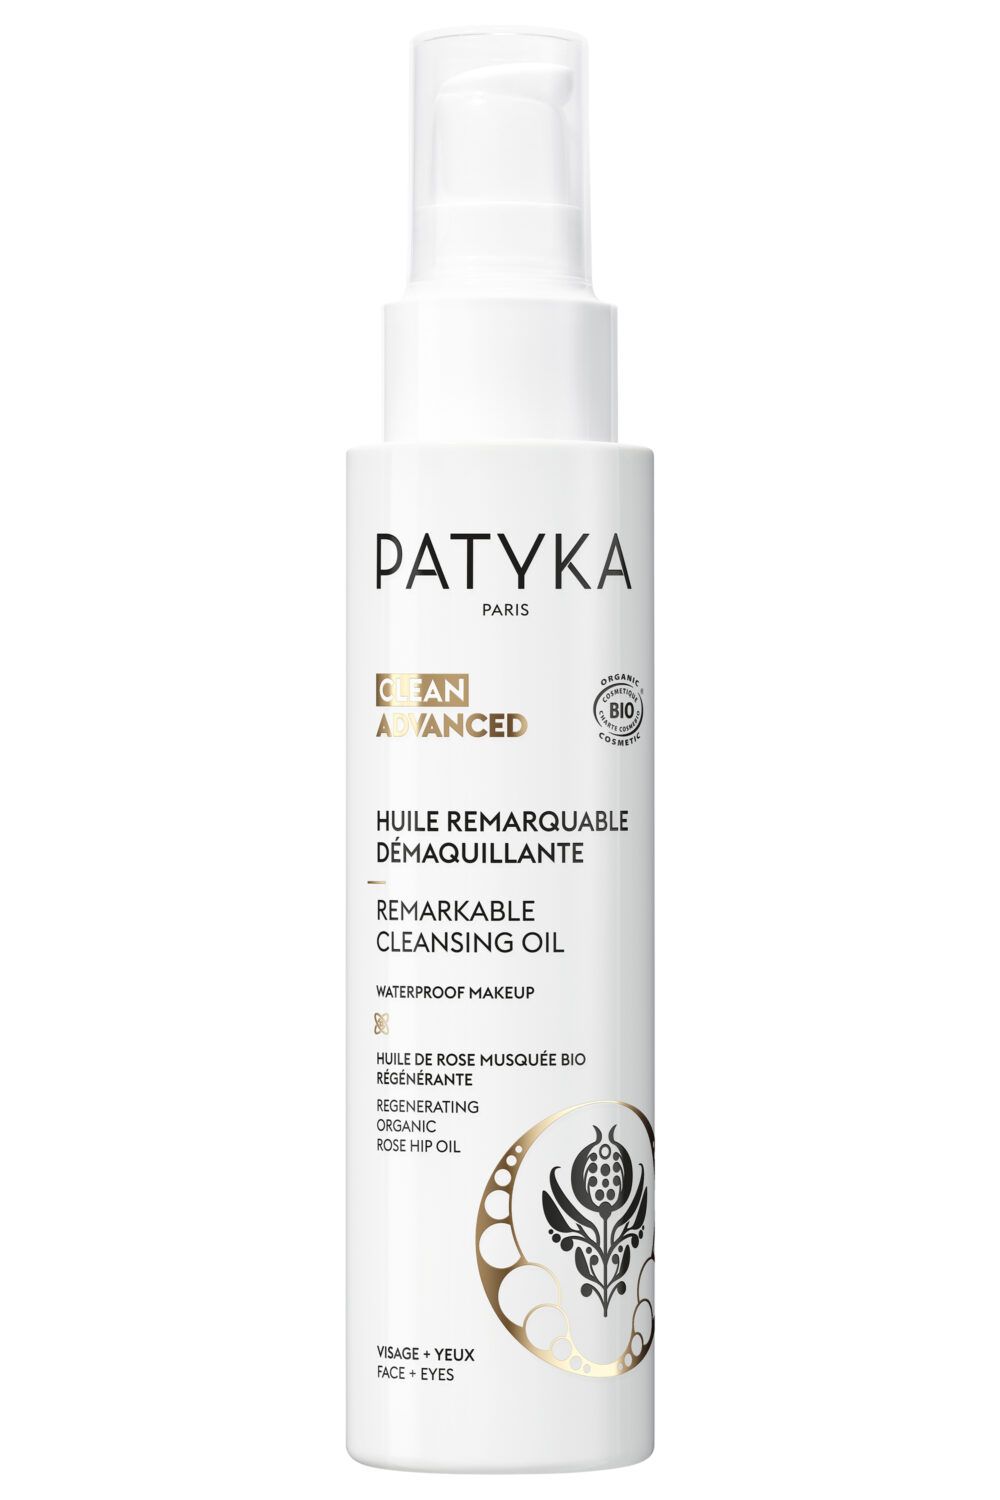 Patyka - Huile remarquable démaquillante Clean Advanced